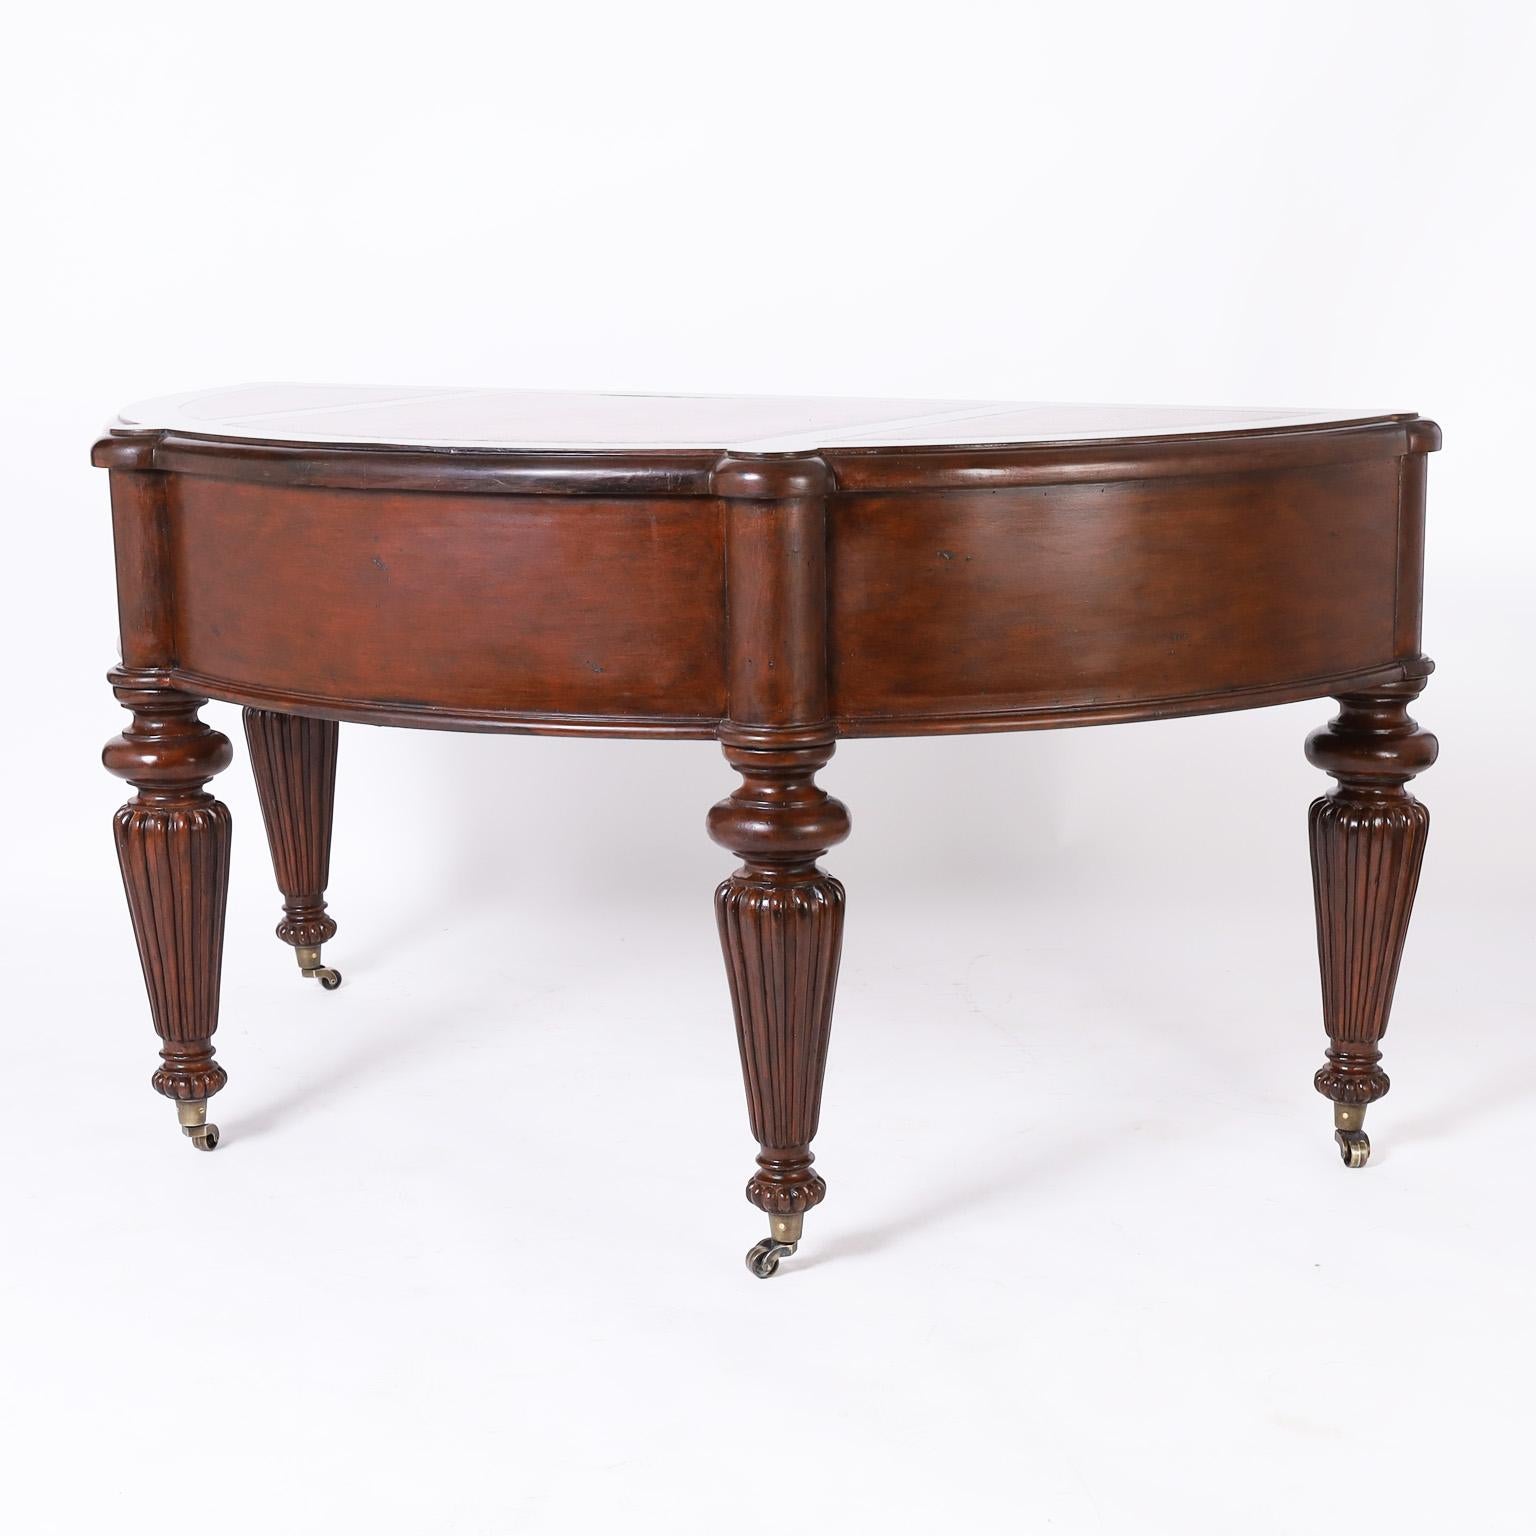 Turned British Colonial Style Demi-Lune Leather Top Desk